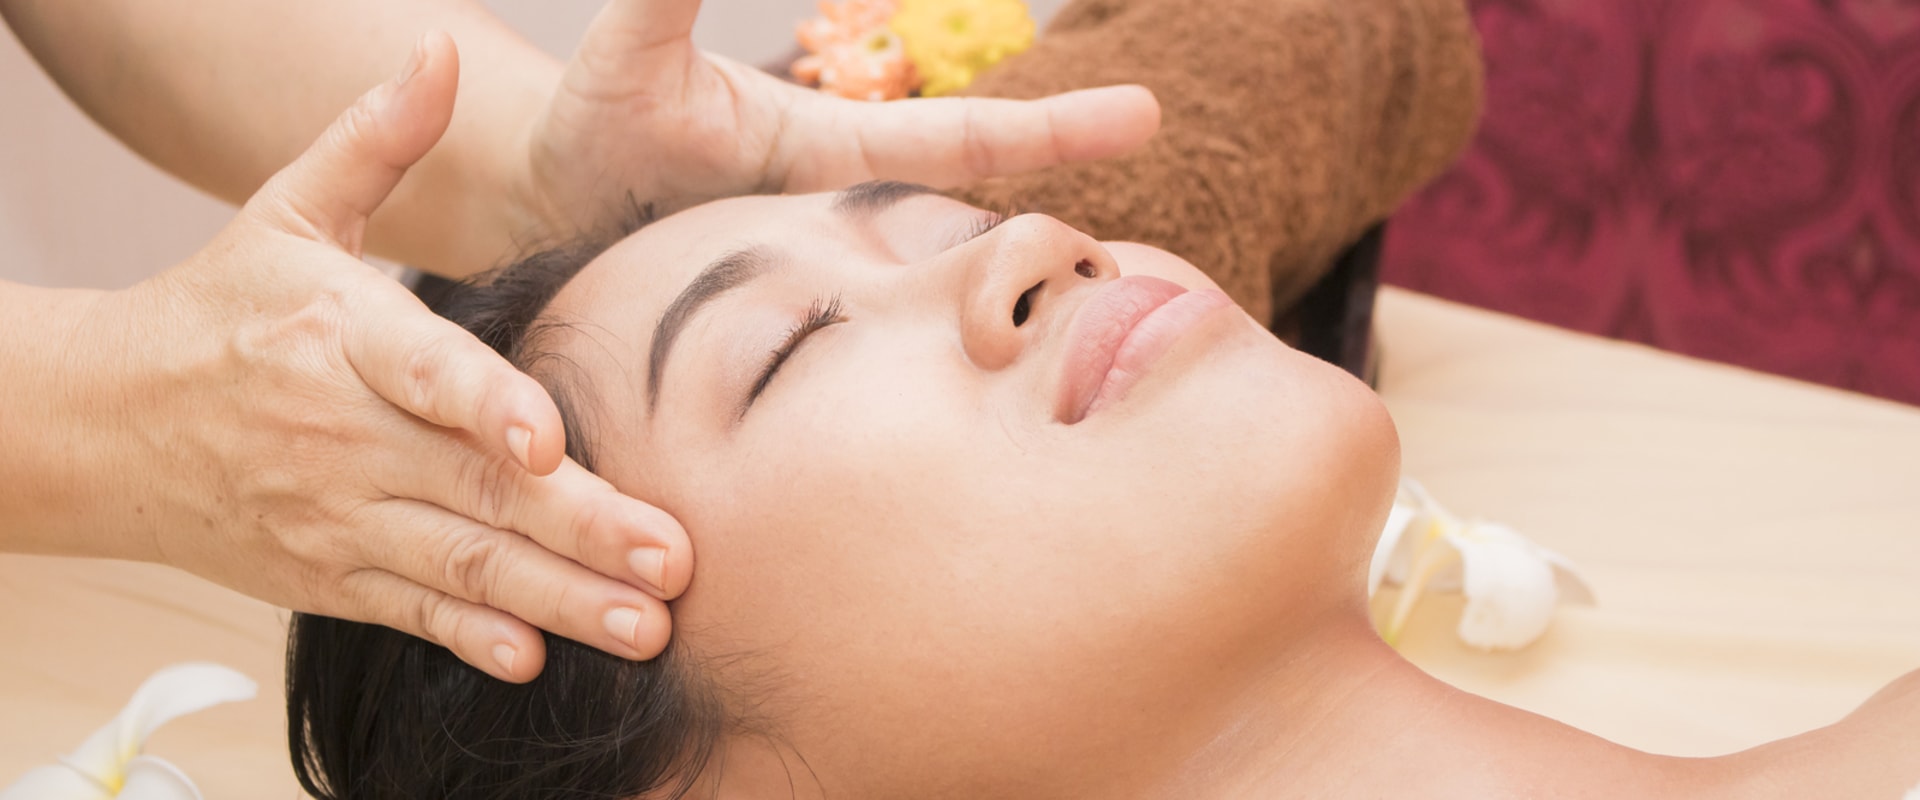 Massage Therapy Bliss: Indulge In A Tranquil Thai Massage In Gdansk Old Town